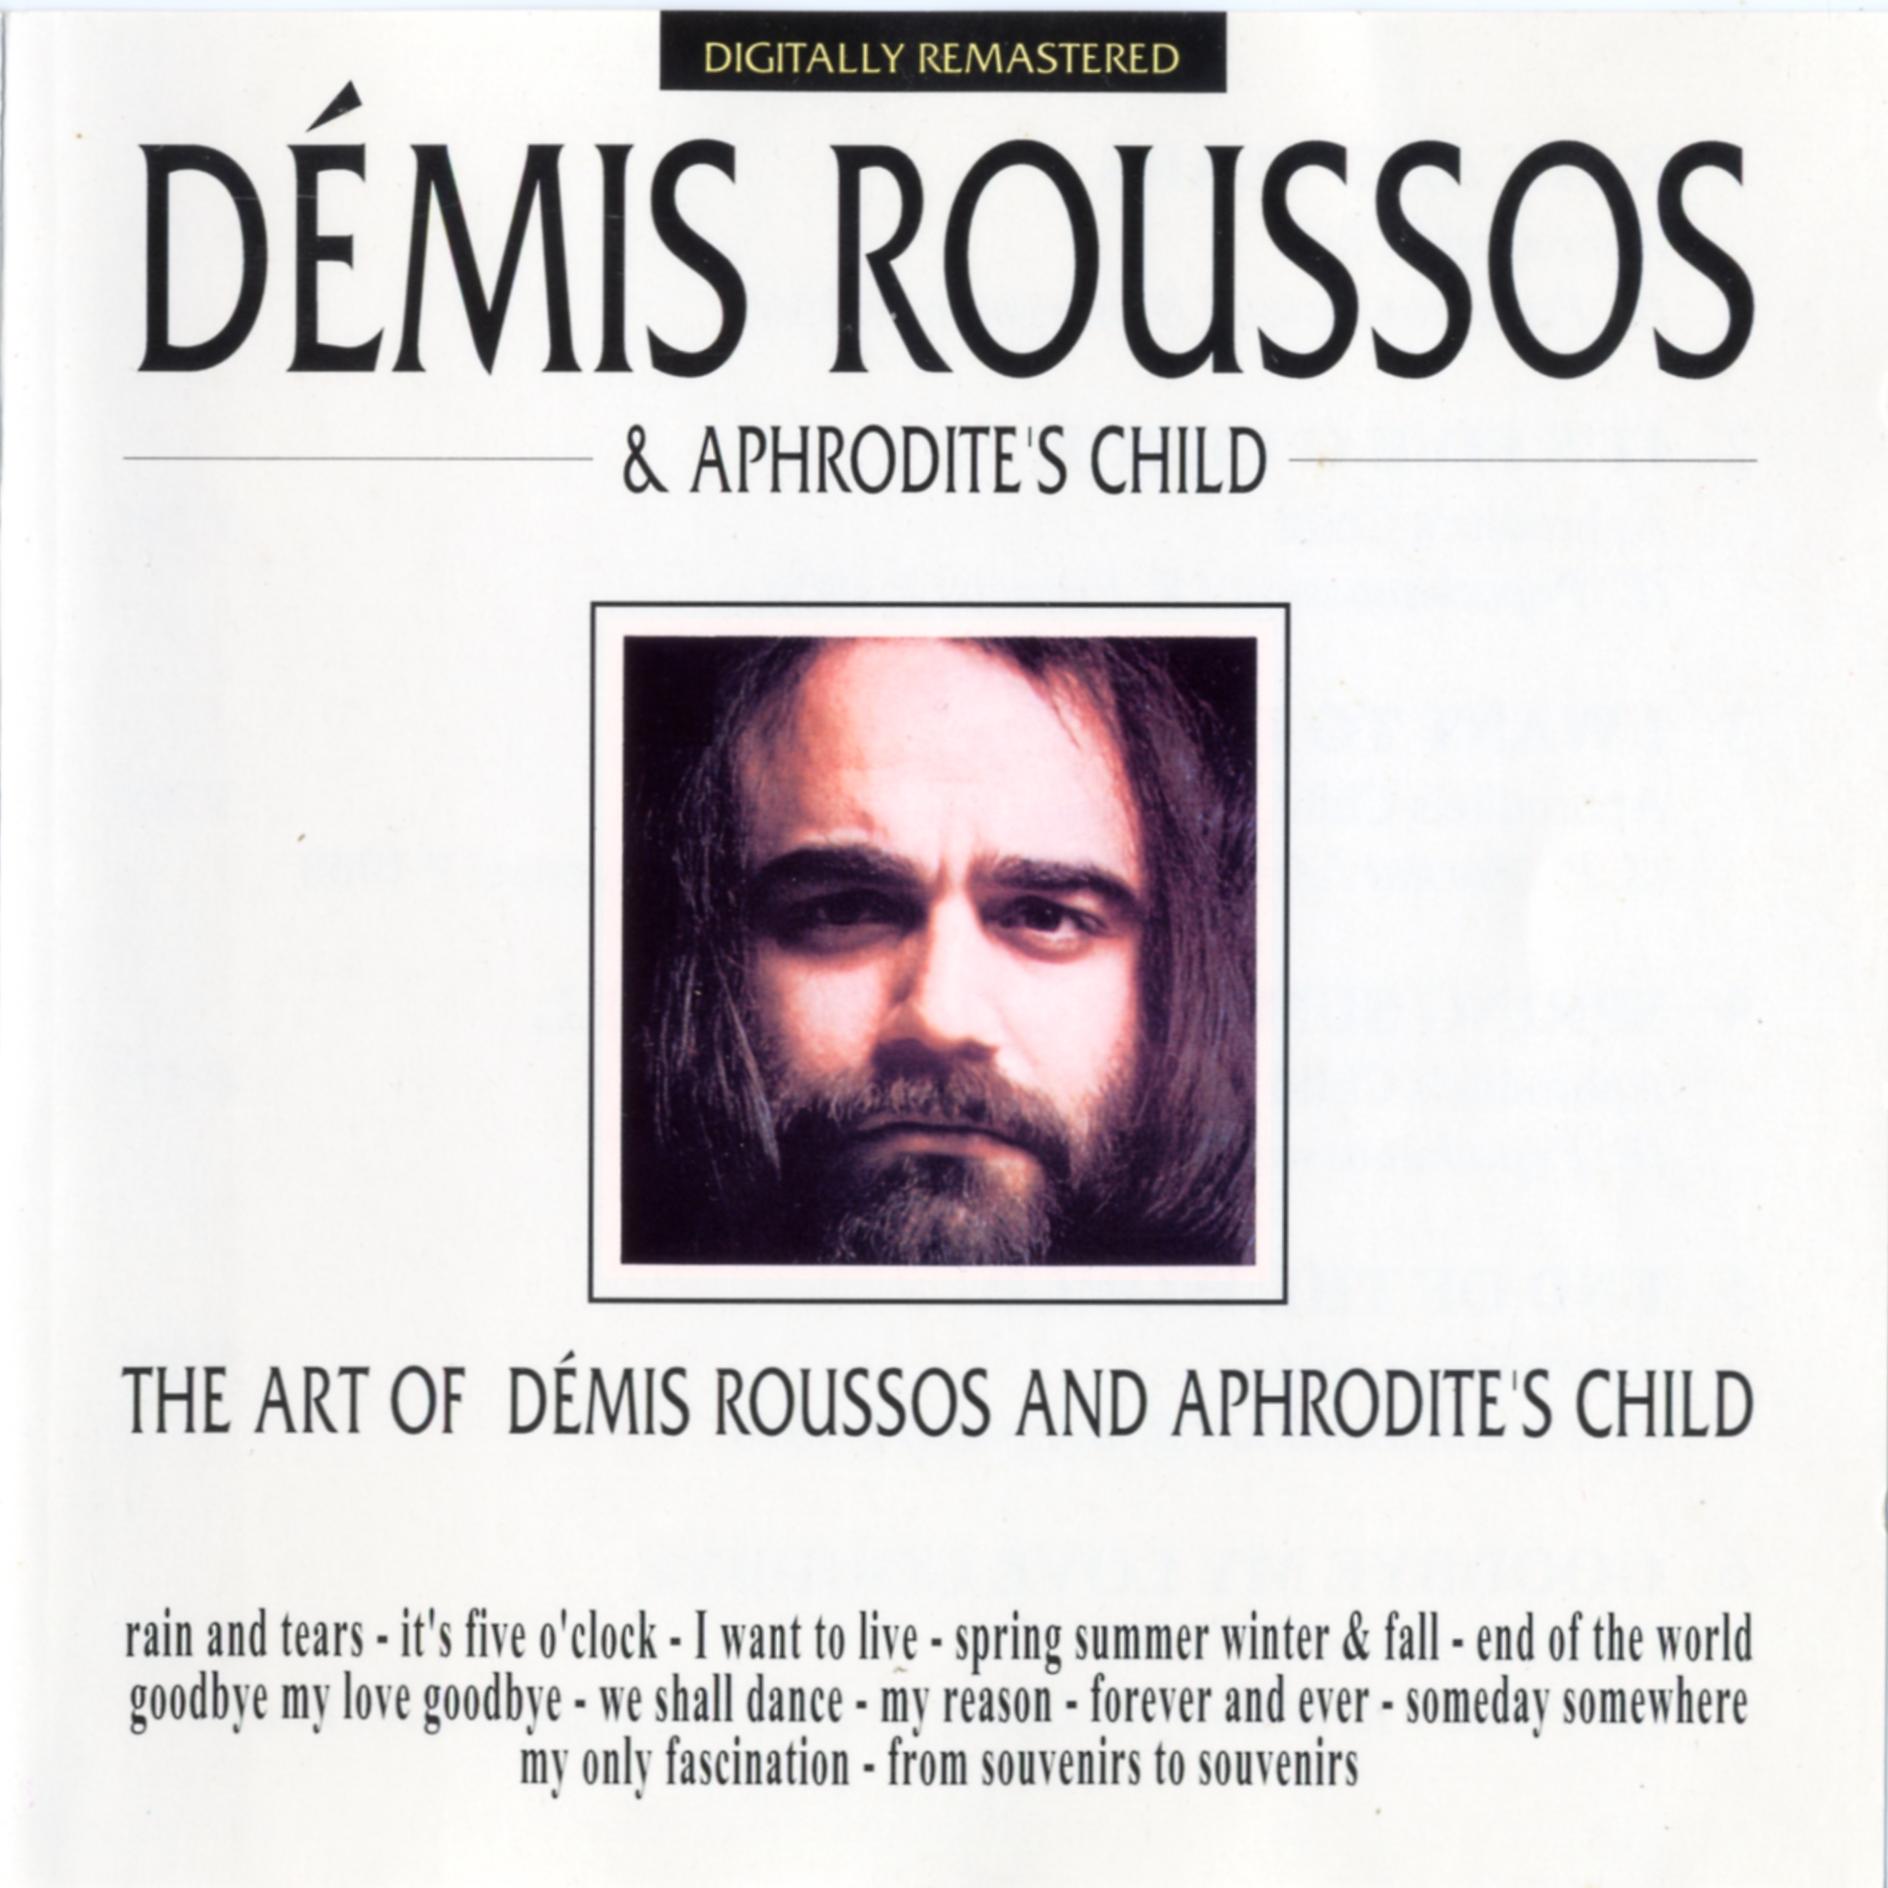 Demis Roussos image and pictorial